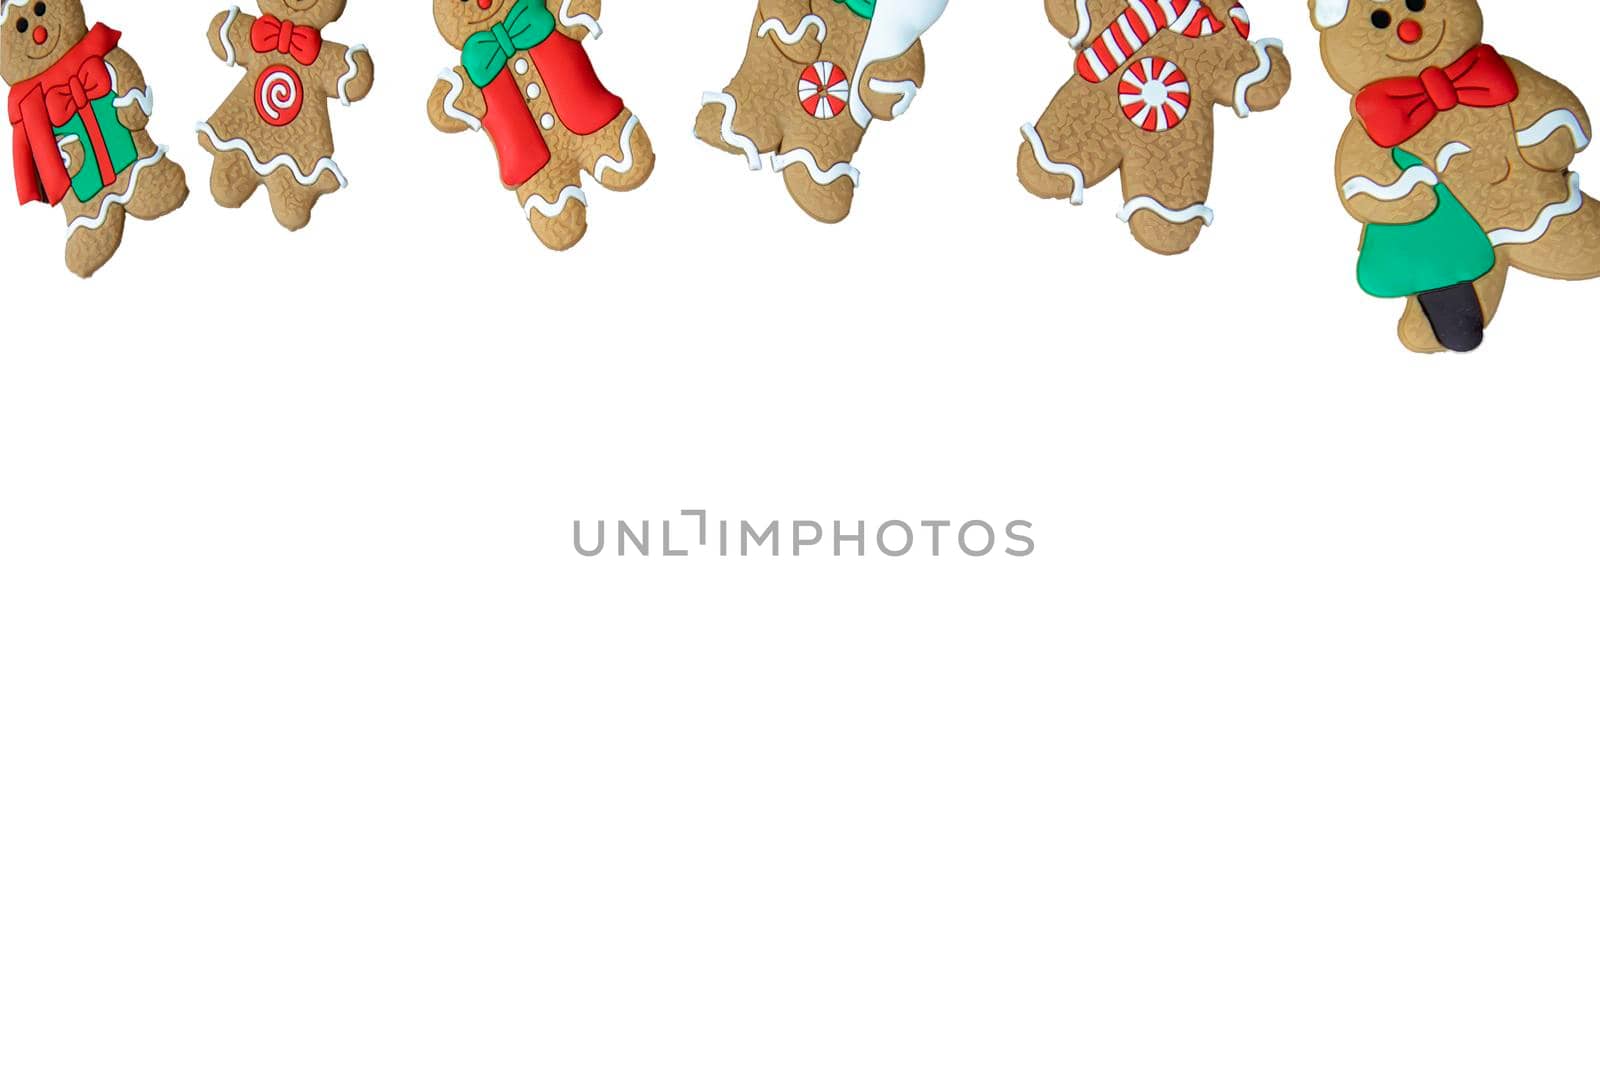 Gingerbread man cookies in a row isolated on white background, copy space, Christmas season,food and winter concept by Annebel146